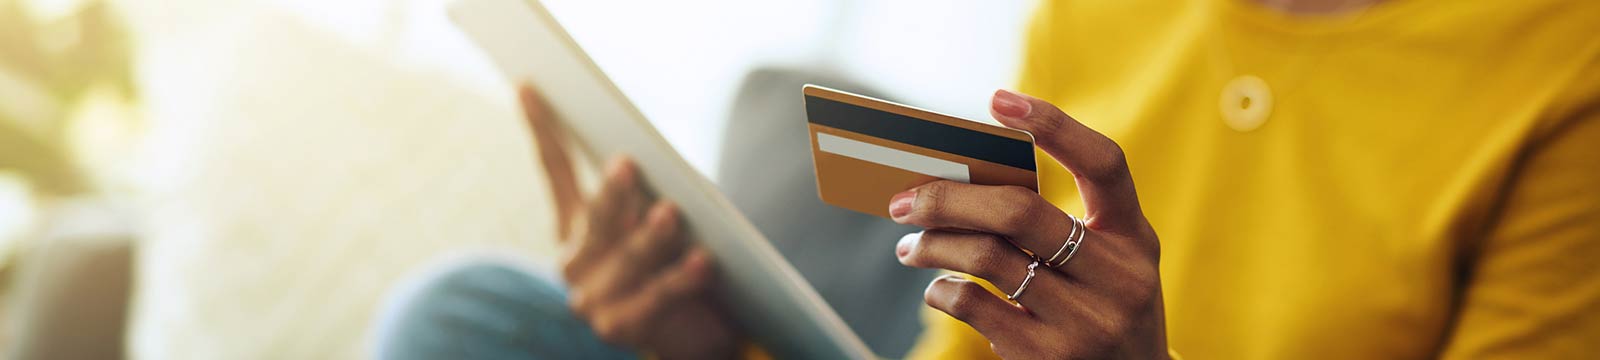 a woman using her debit/credit card for an online purchase